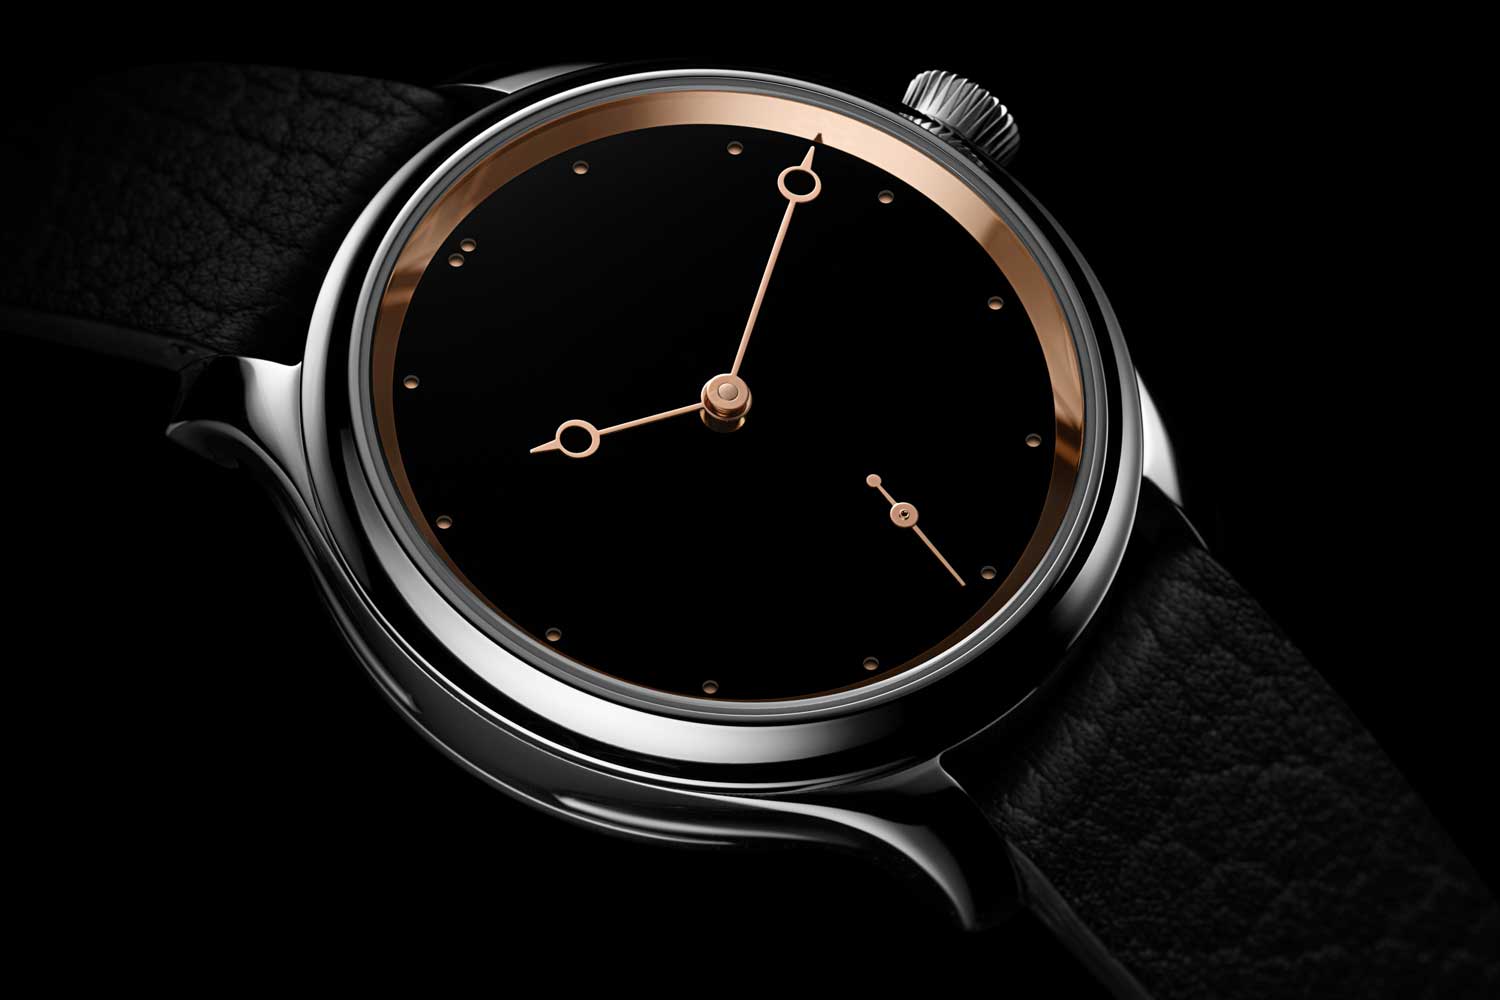 H. Moser & Cie x The Armoury Endeavour Small Seconds Total Eclipse in steel with red gold inner bezel